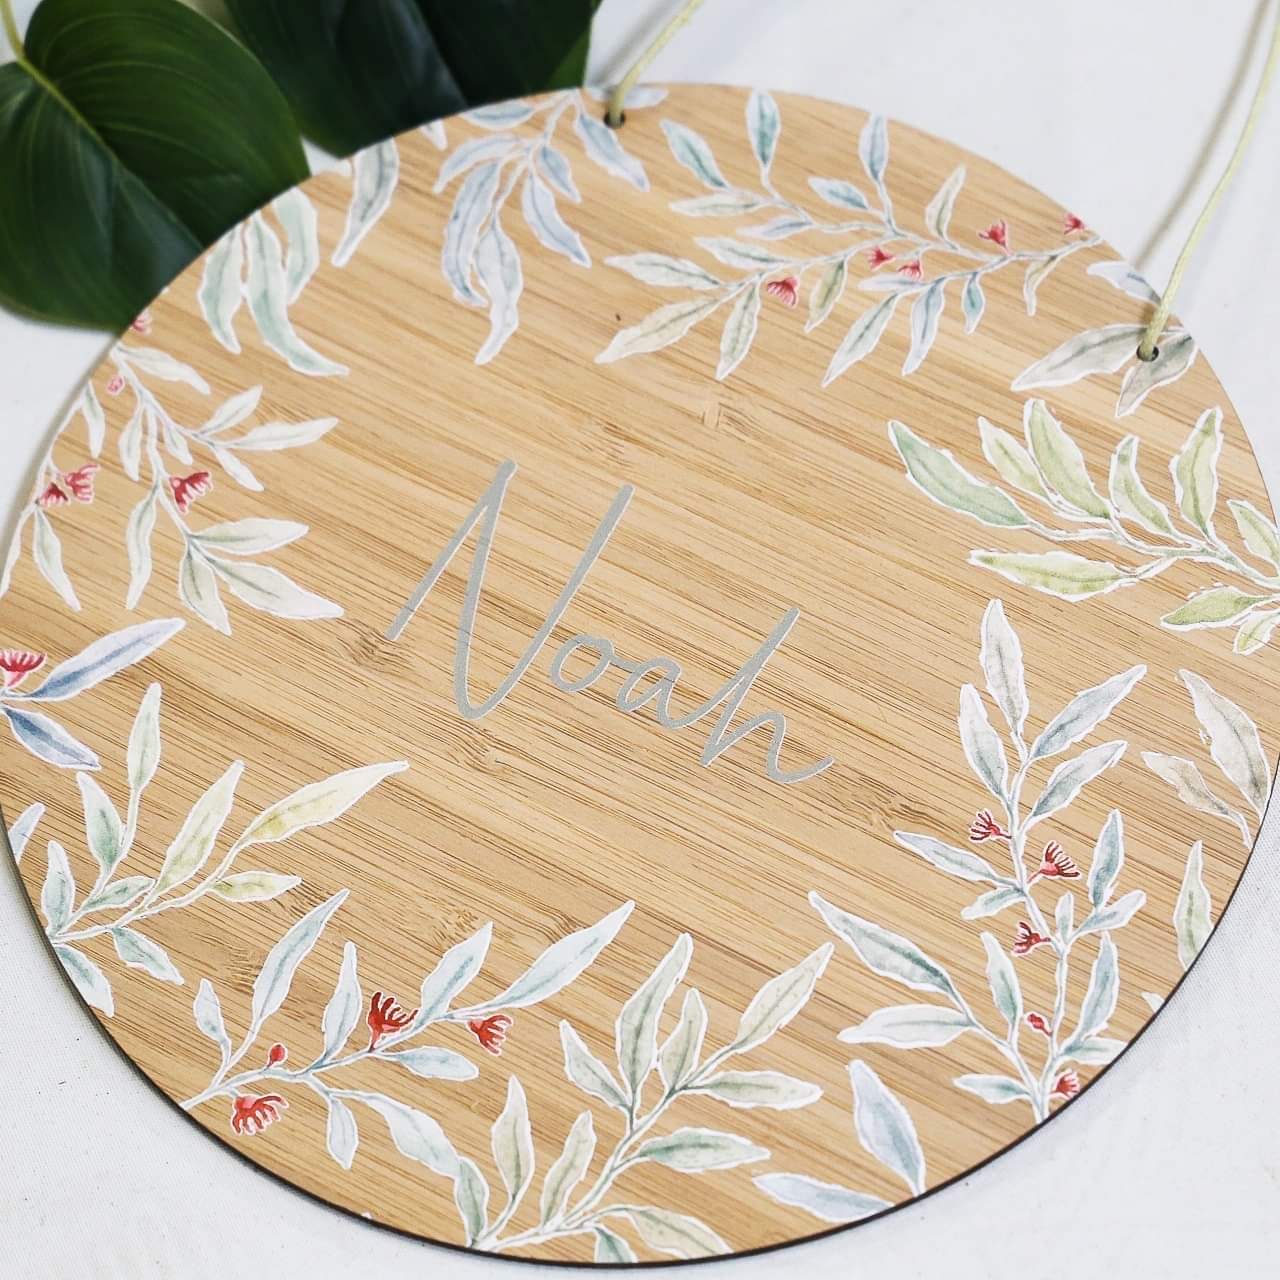 Printed Round Plaque- Red Floral & Folliage